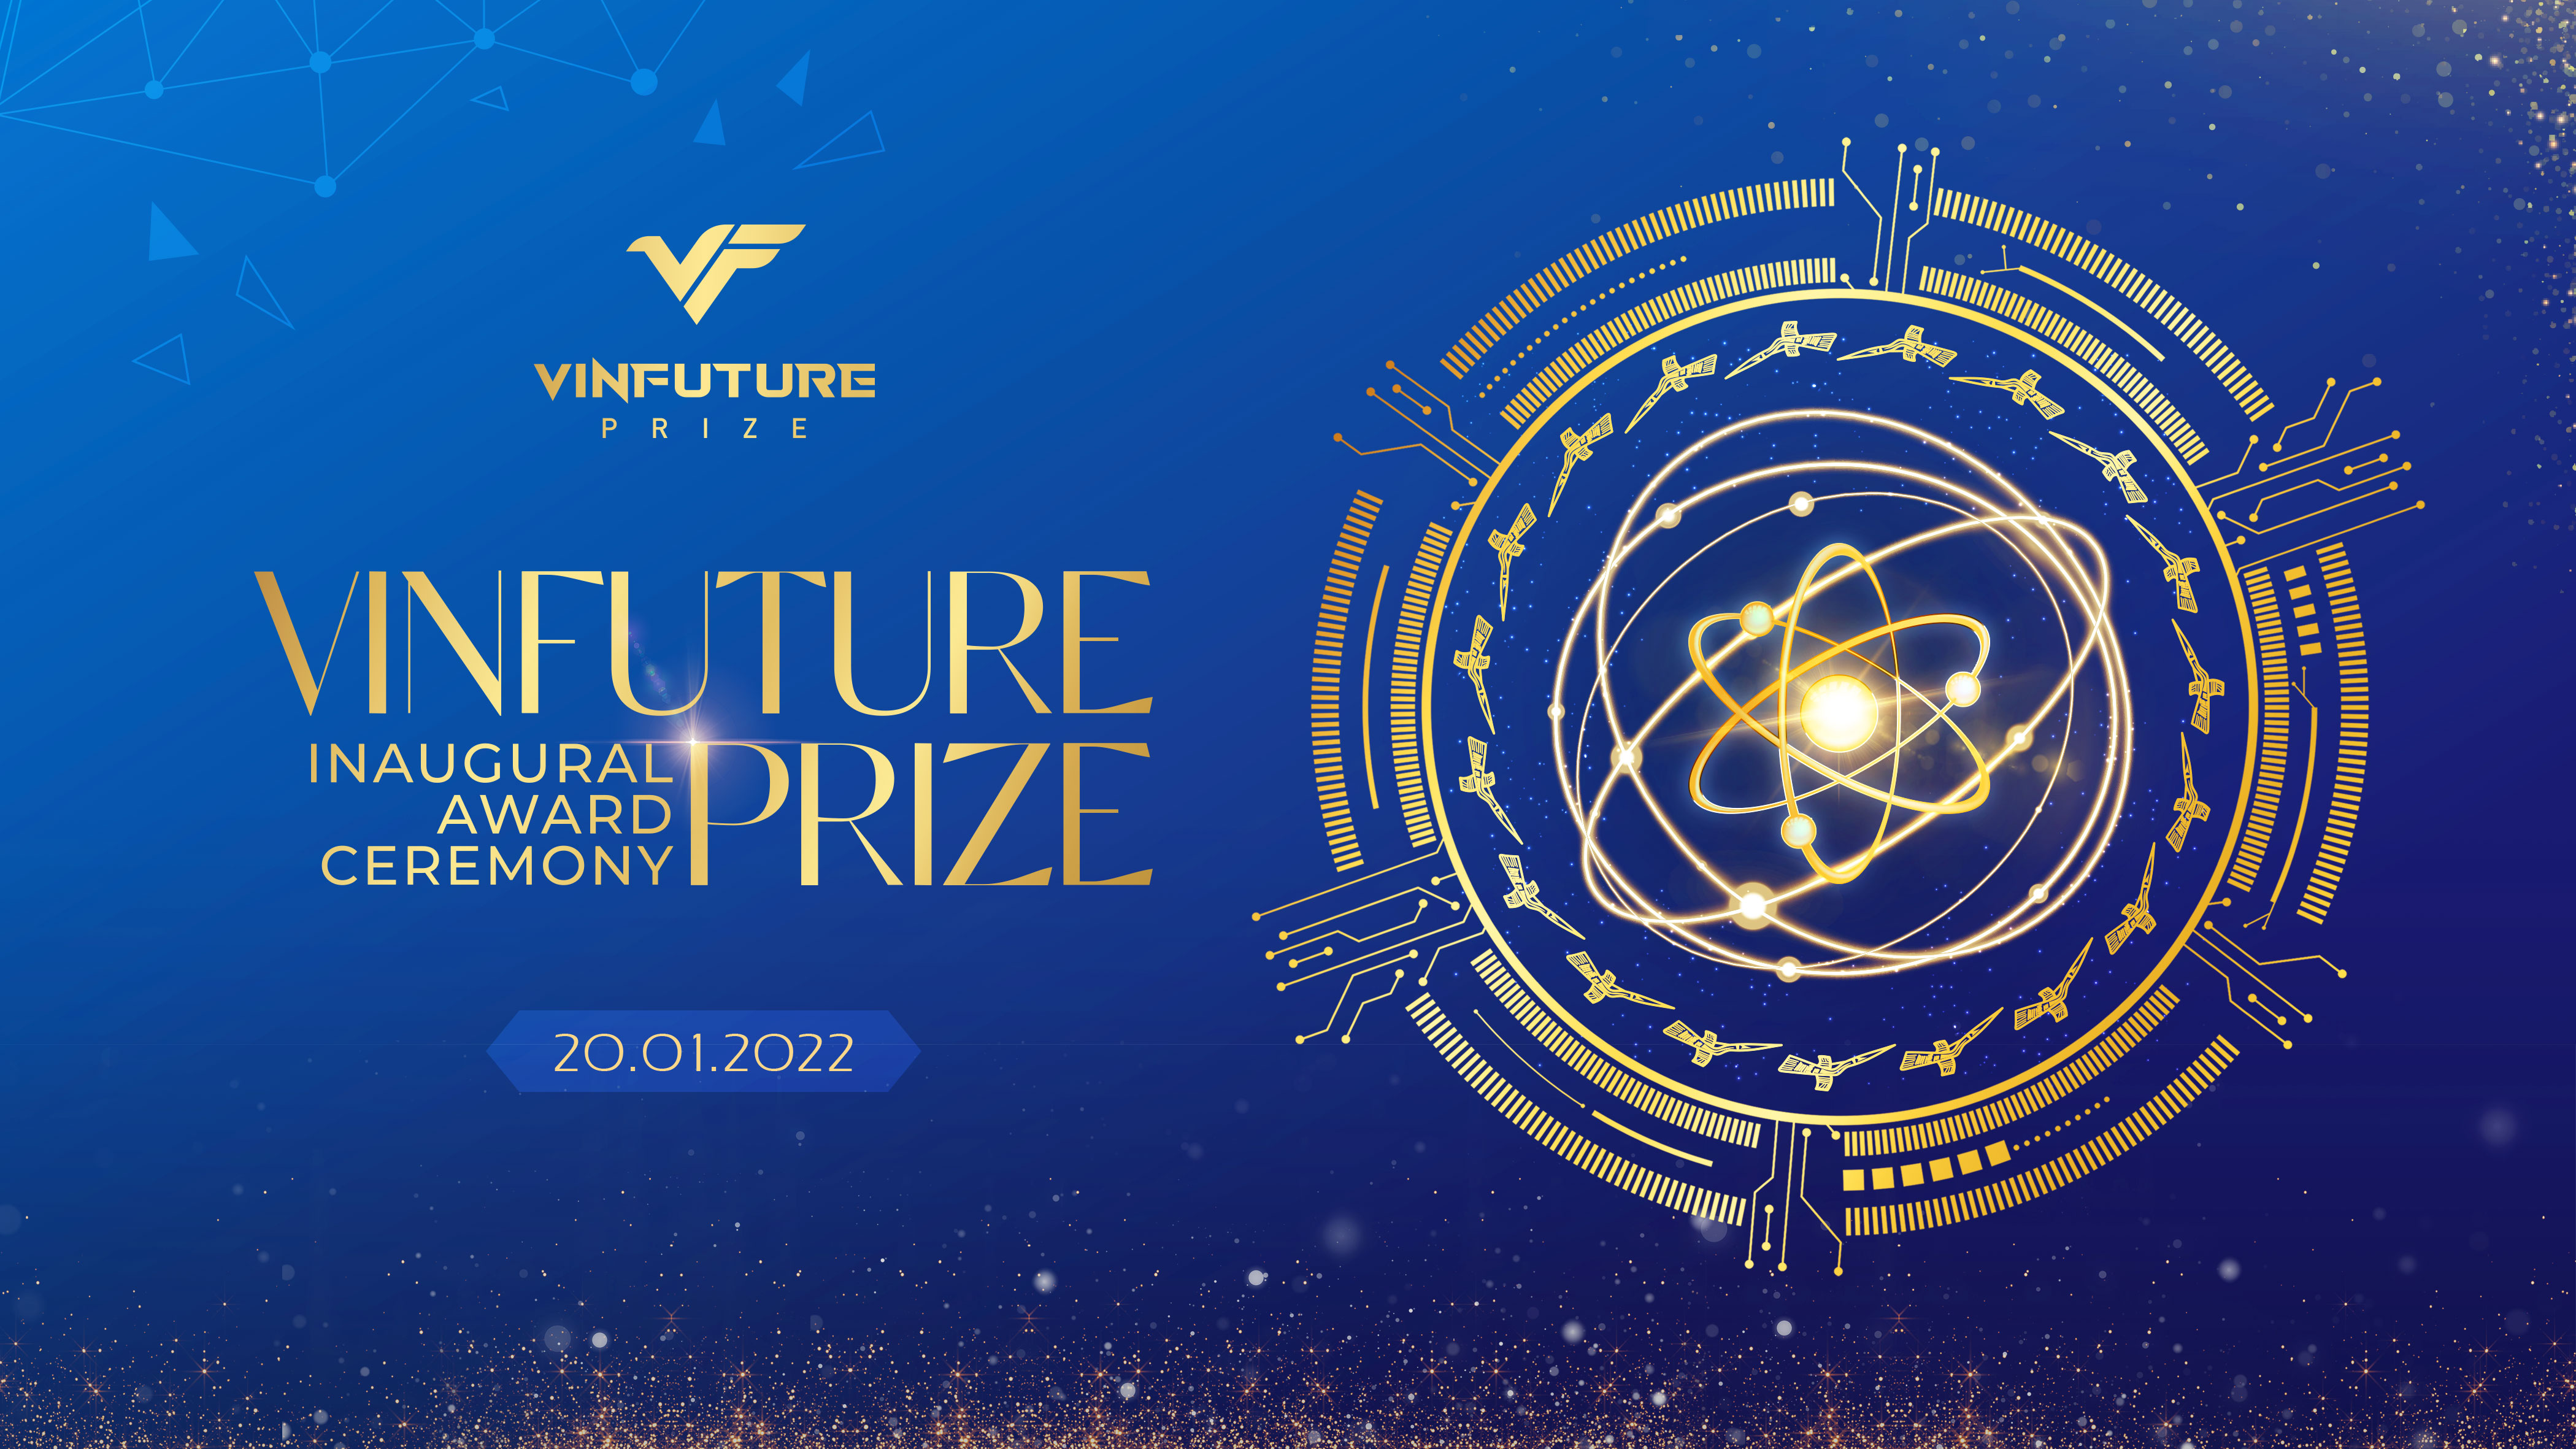 Inaugural Vinfuture Prize Award Ceremony: Celebrating 4 scientific innovations for humanity